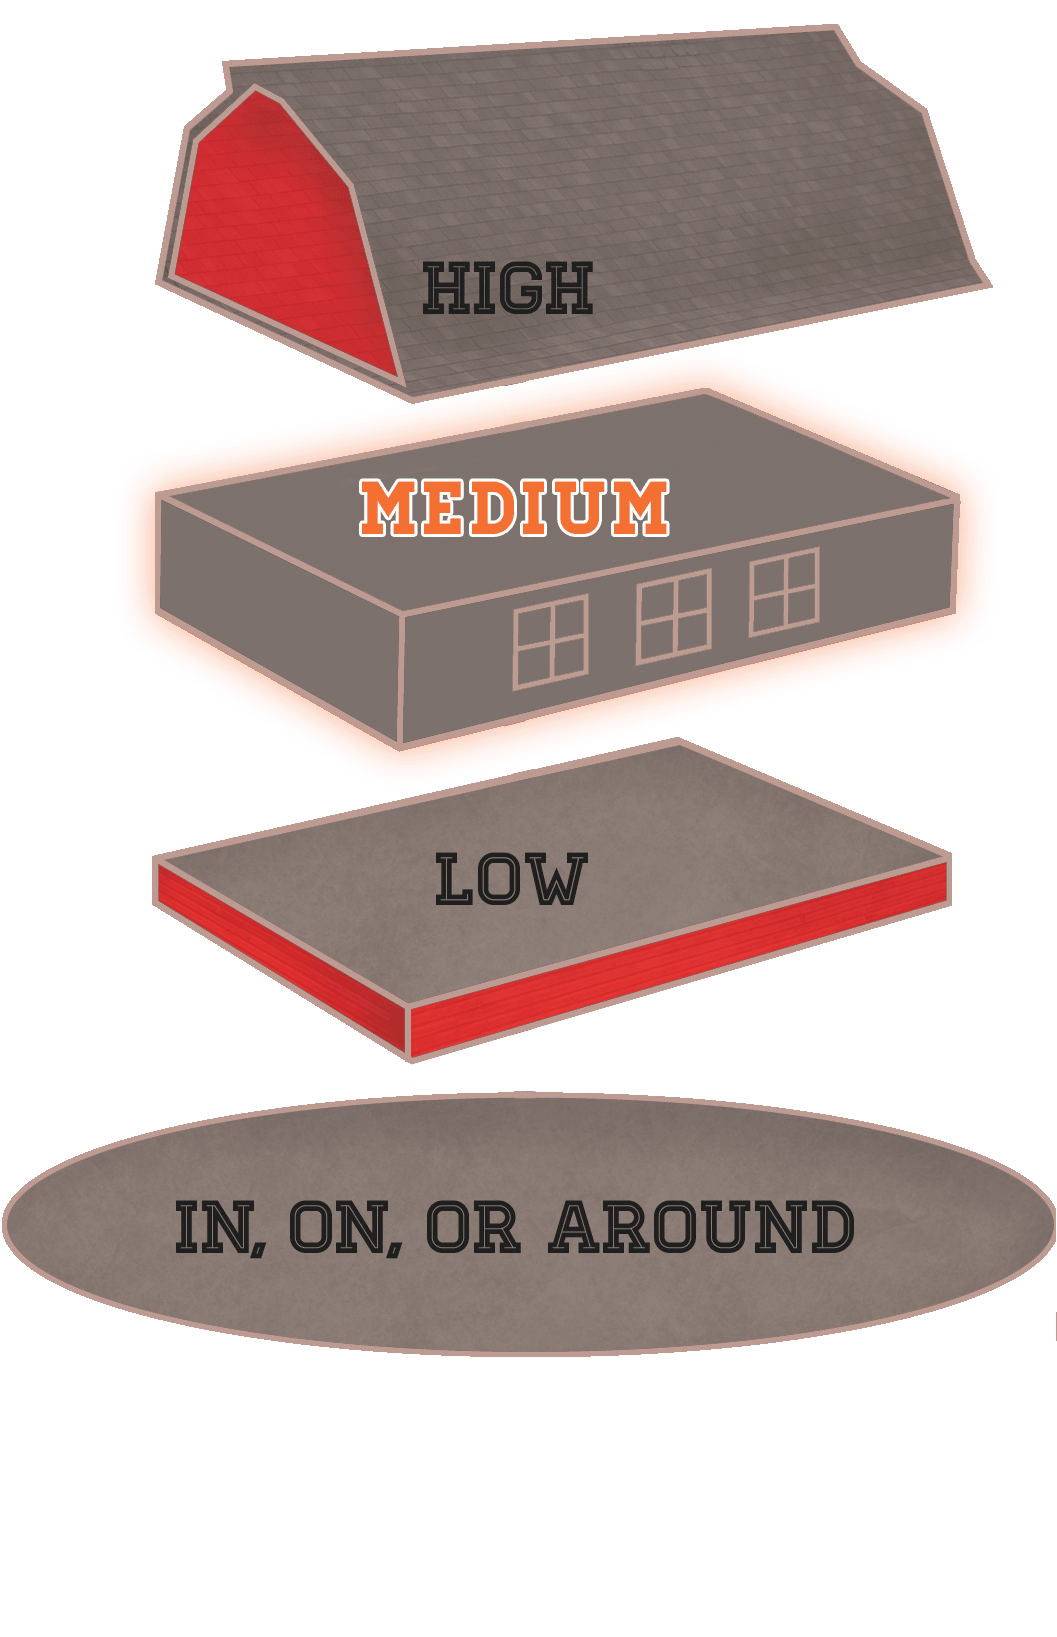 illustration of barn sliced into four section high medium low and in, on and around